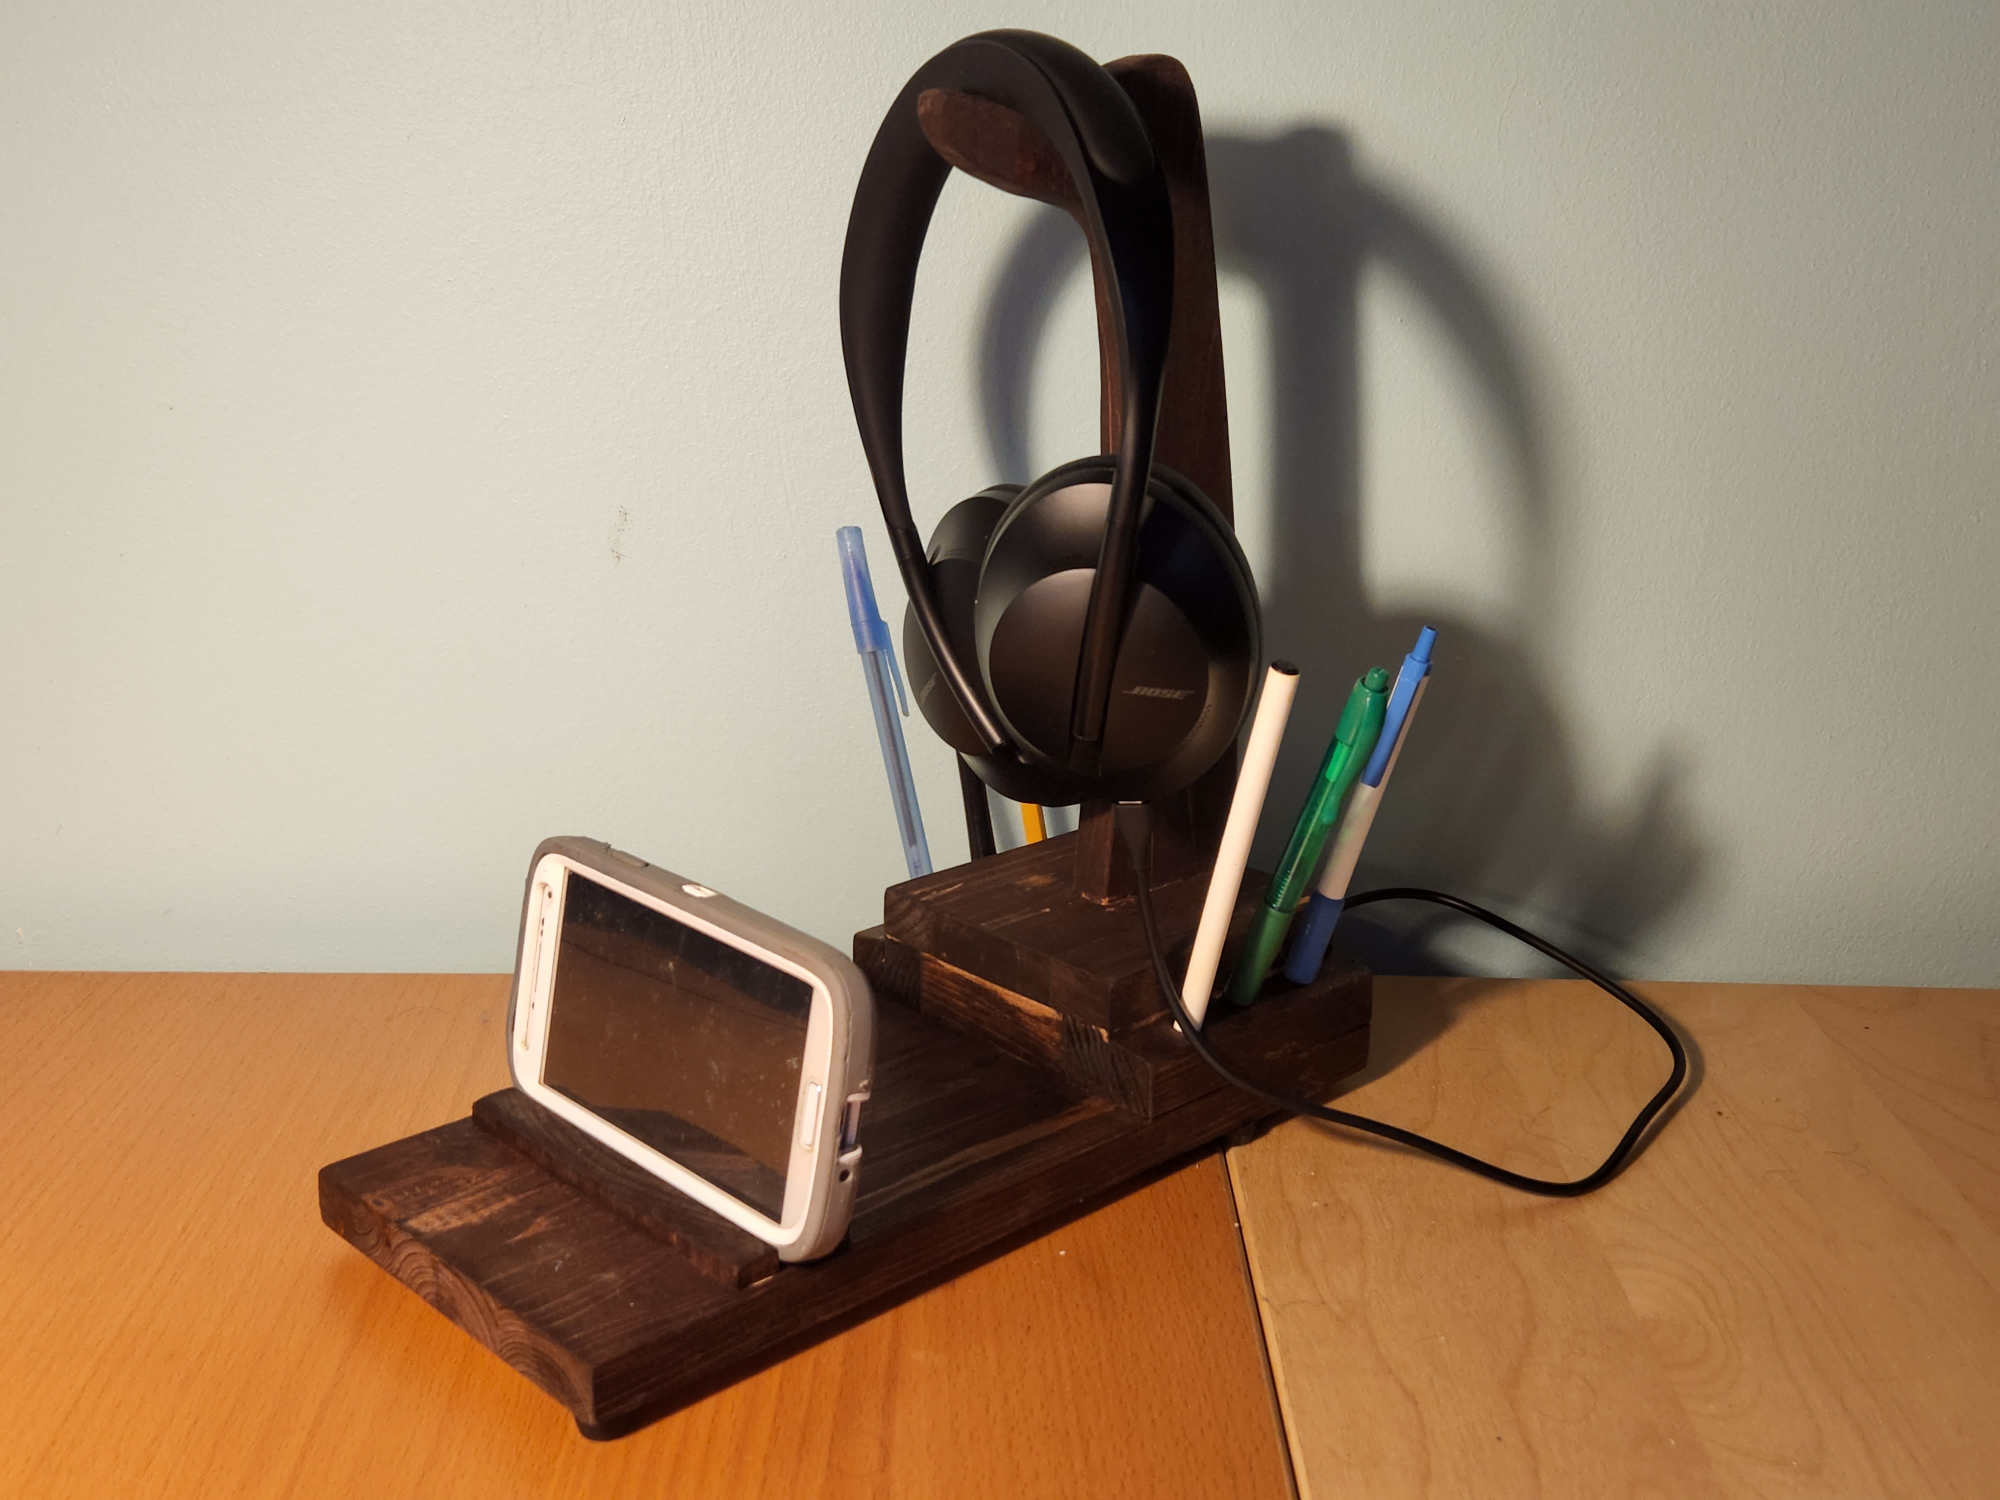 A homemade wooden DIY headphone stand on a lighter-colored wooden table, complete with a phone holder, a USB charging port, and slots for pens and pencils.